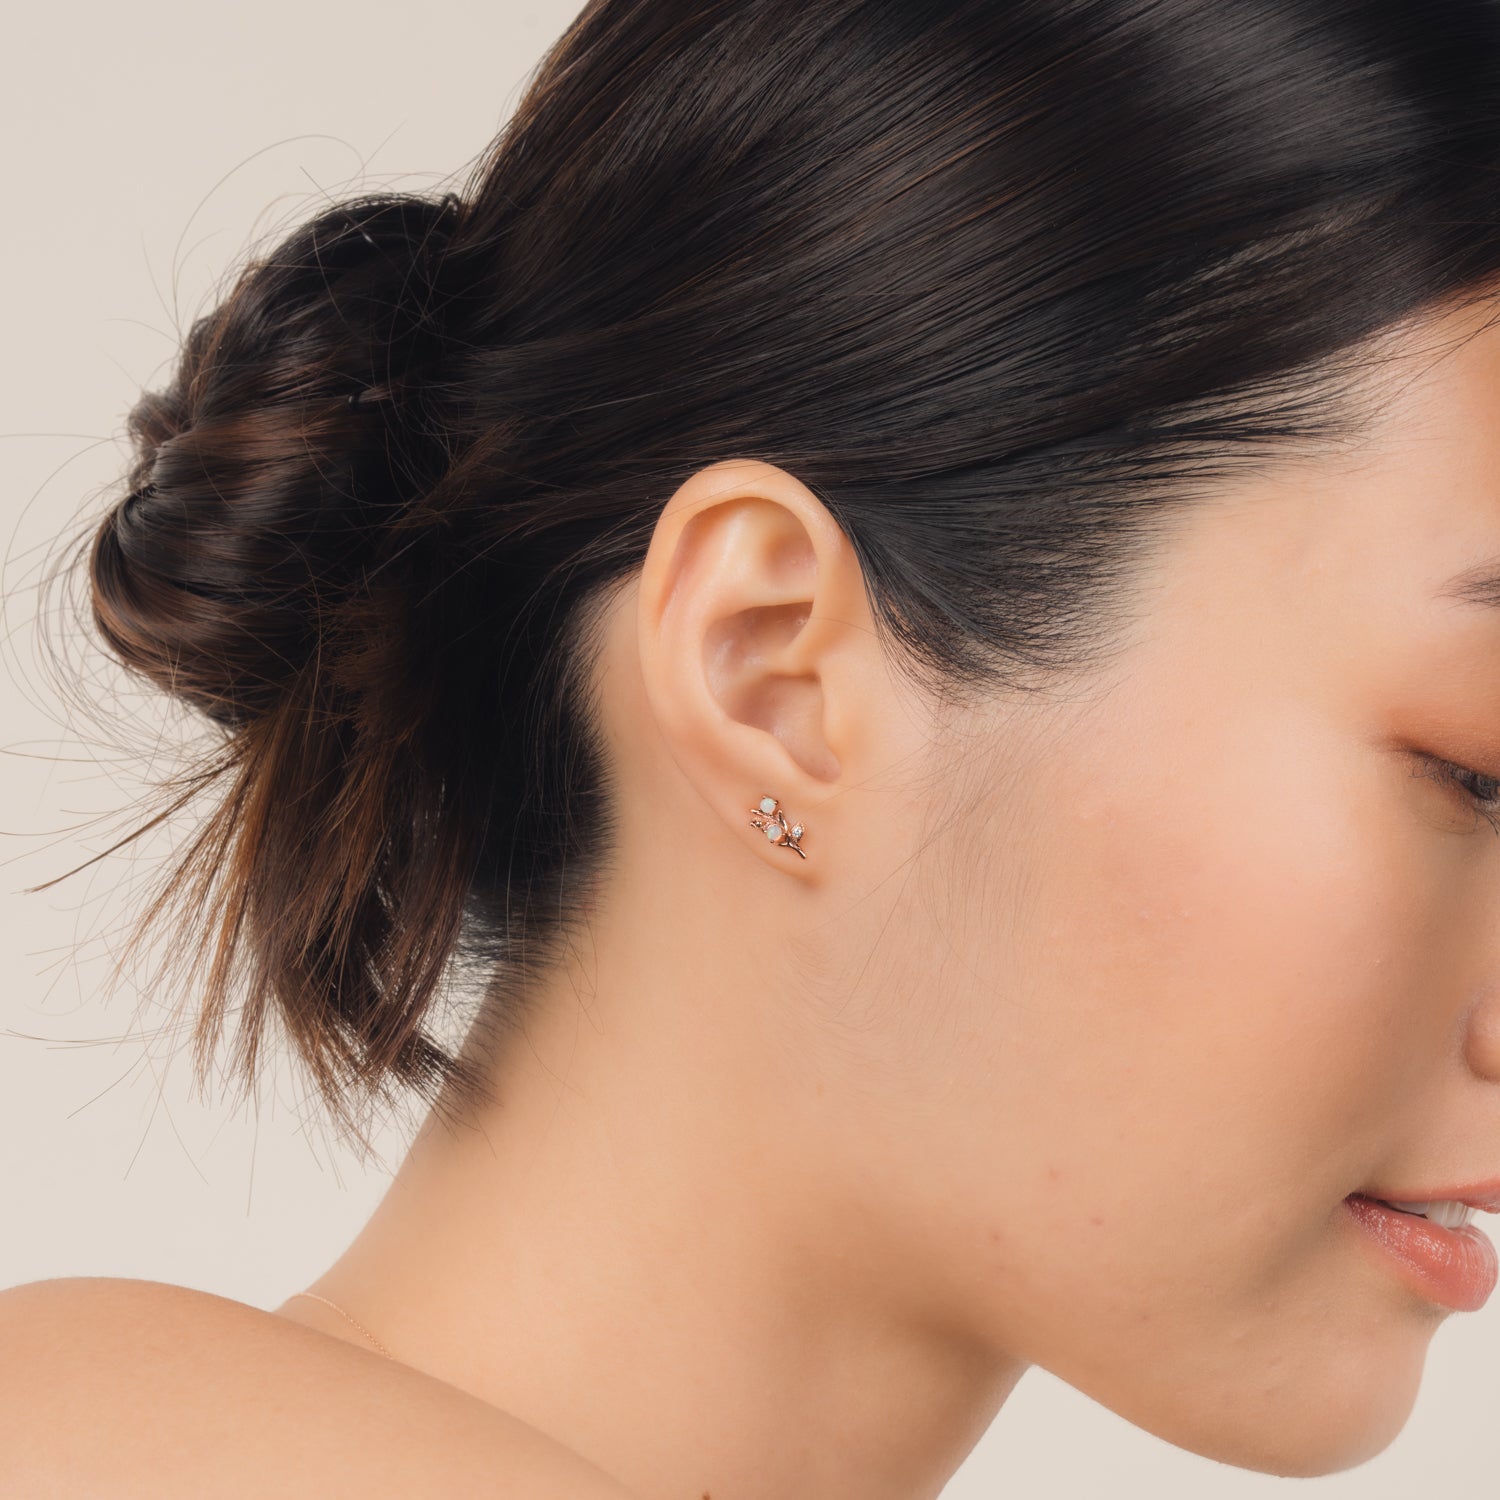 Fine and dainty studs. Model is wearing solid rose gold earrings set with opals and conflict free diamonds